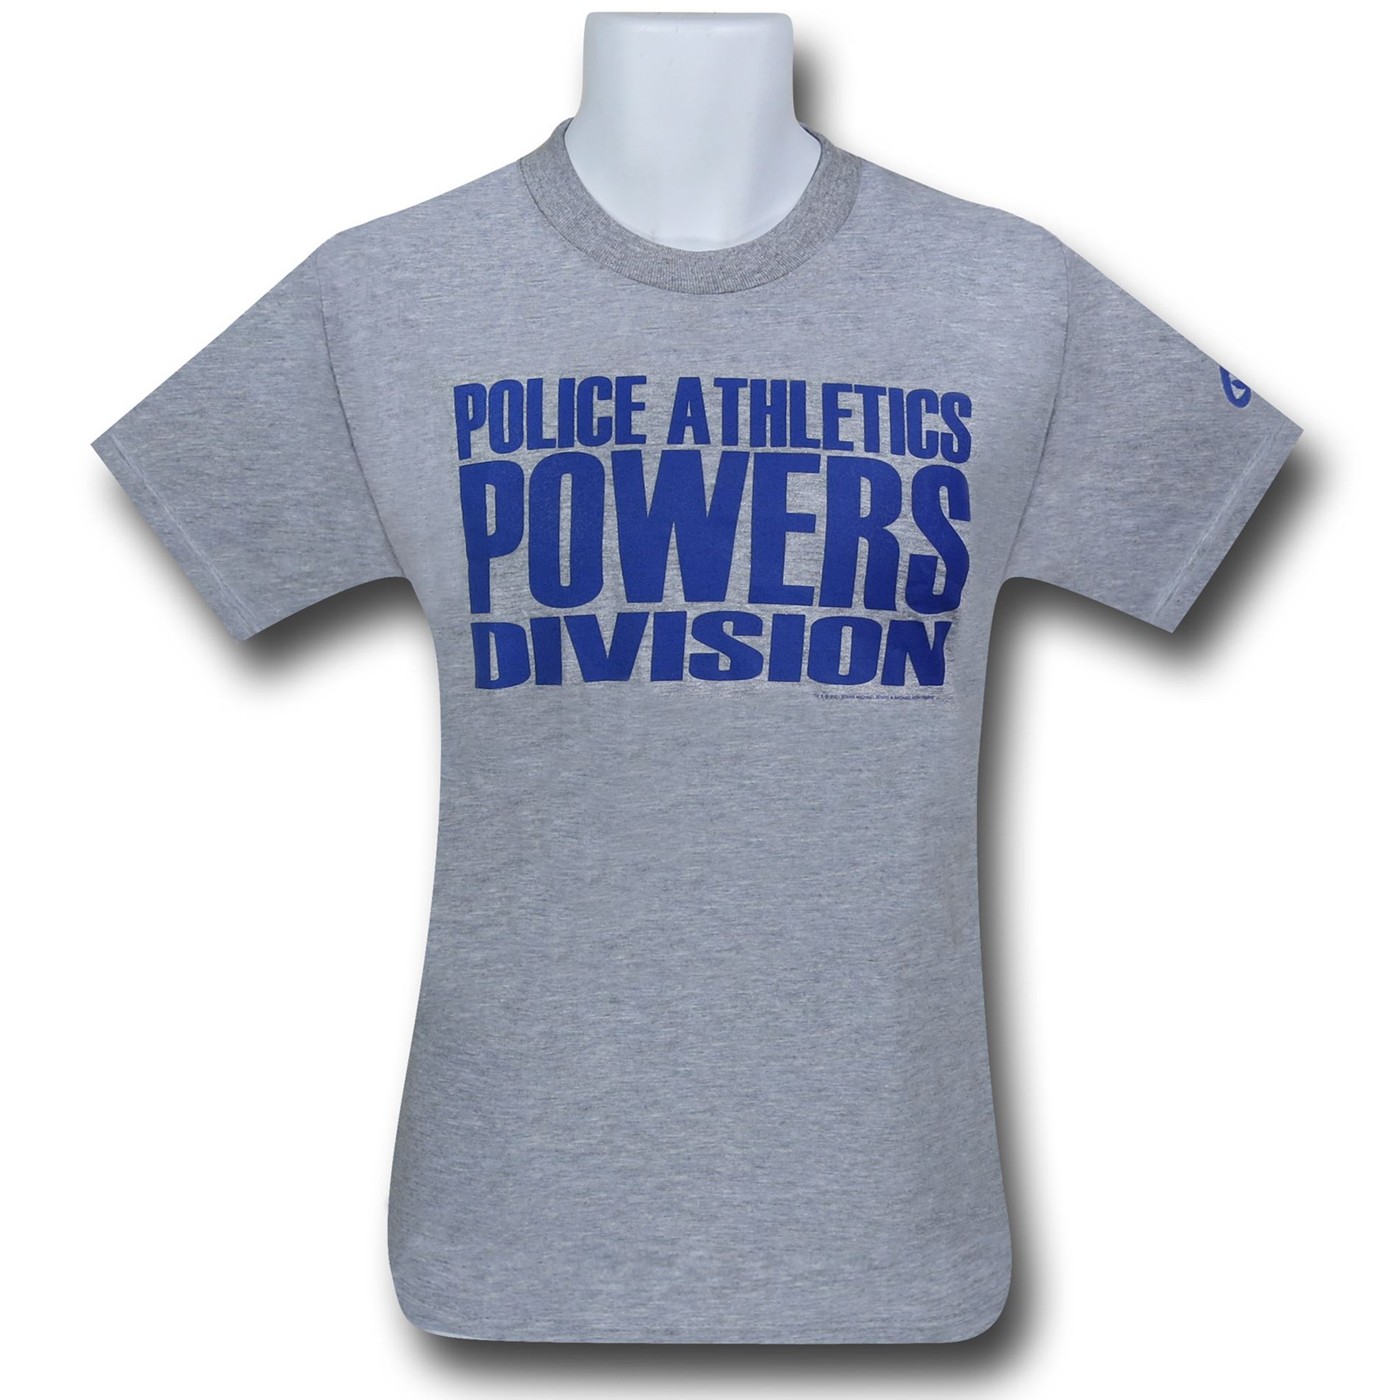 Police Athletic Powers Division T-Shirt